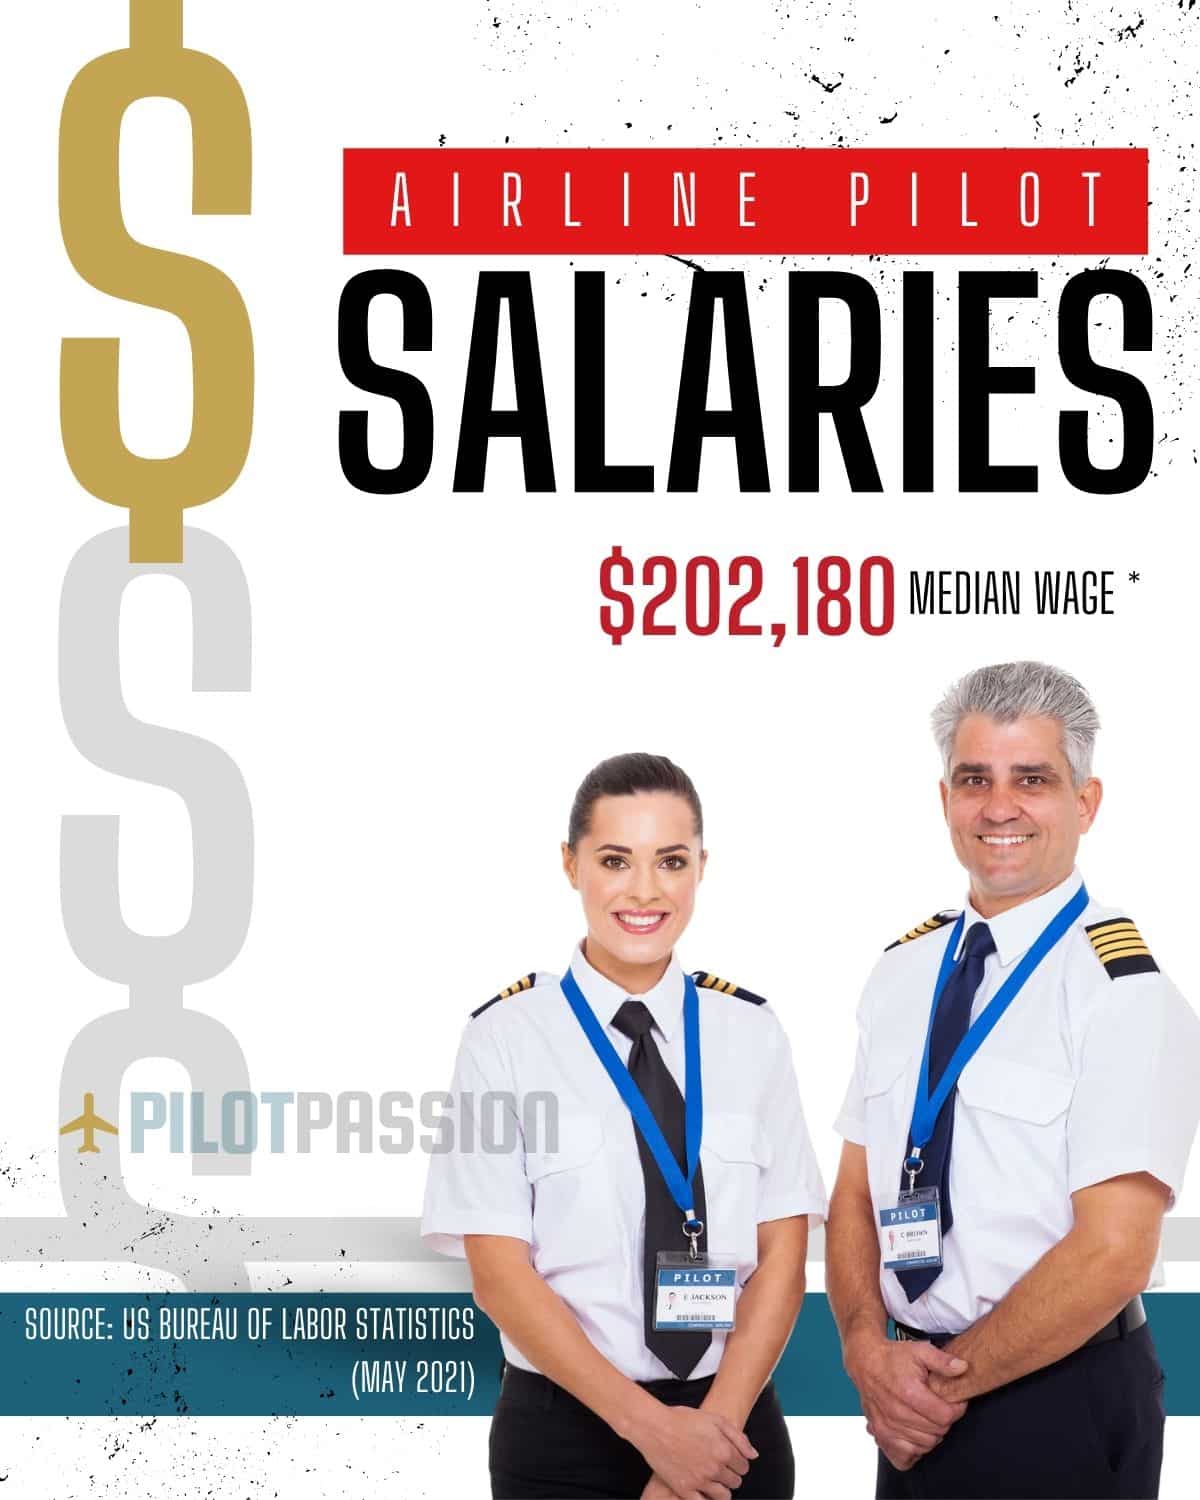 Airline Pilot Salary: How Much Can They Earn? 1